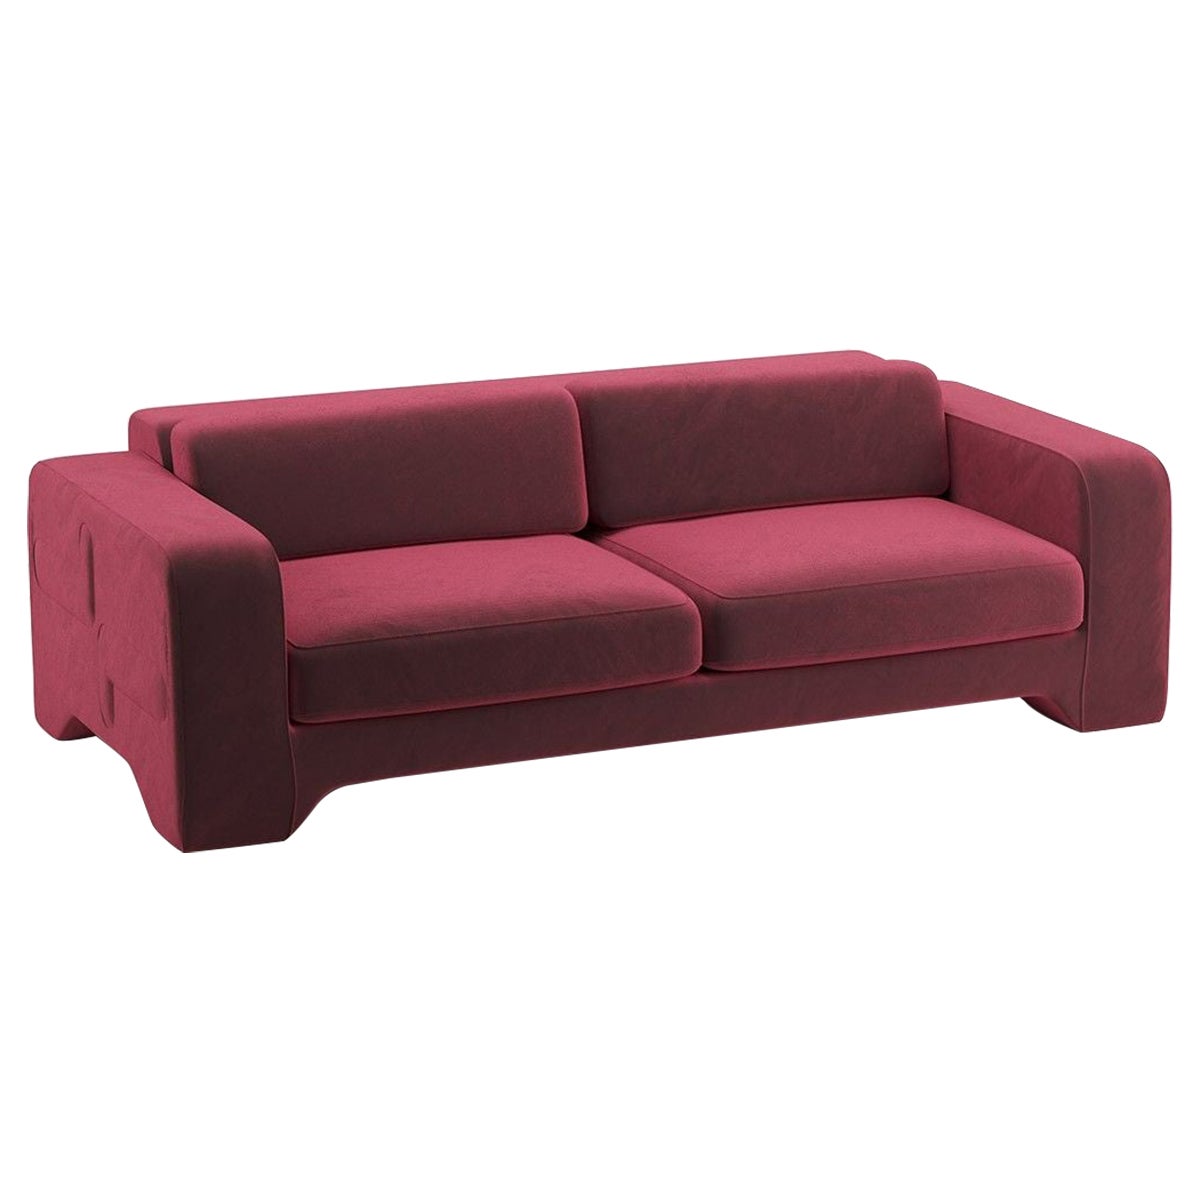 Popus Editions Giovanna 3 Seater Sofa in Red Como Velvet Upholstery For Sale